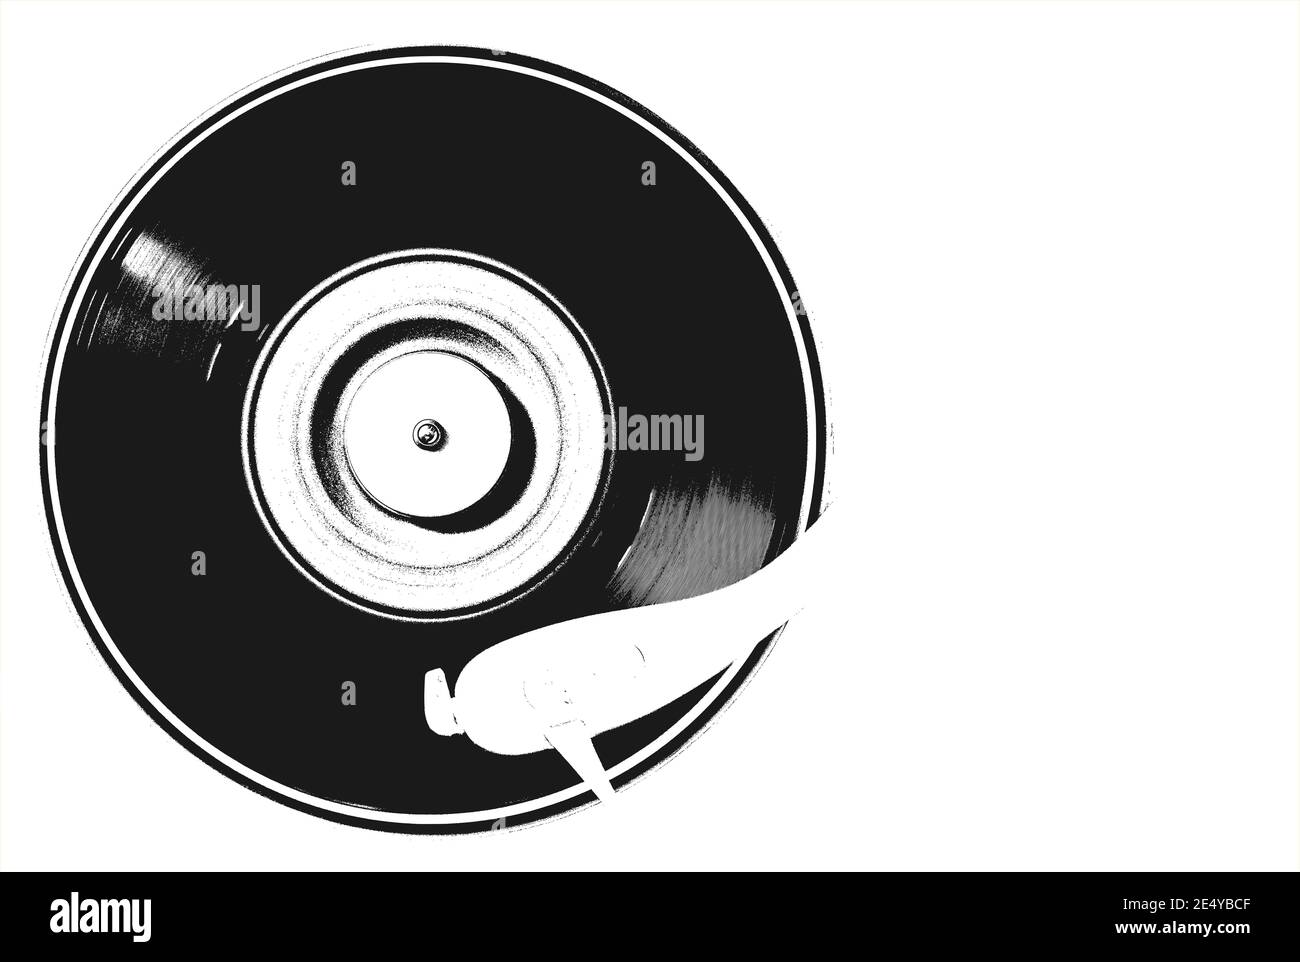 illustration in pop style of a vinyl on a turntable Stock Photo